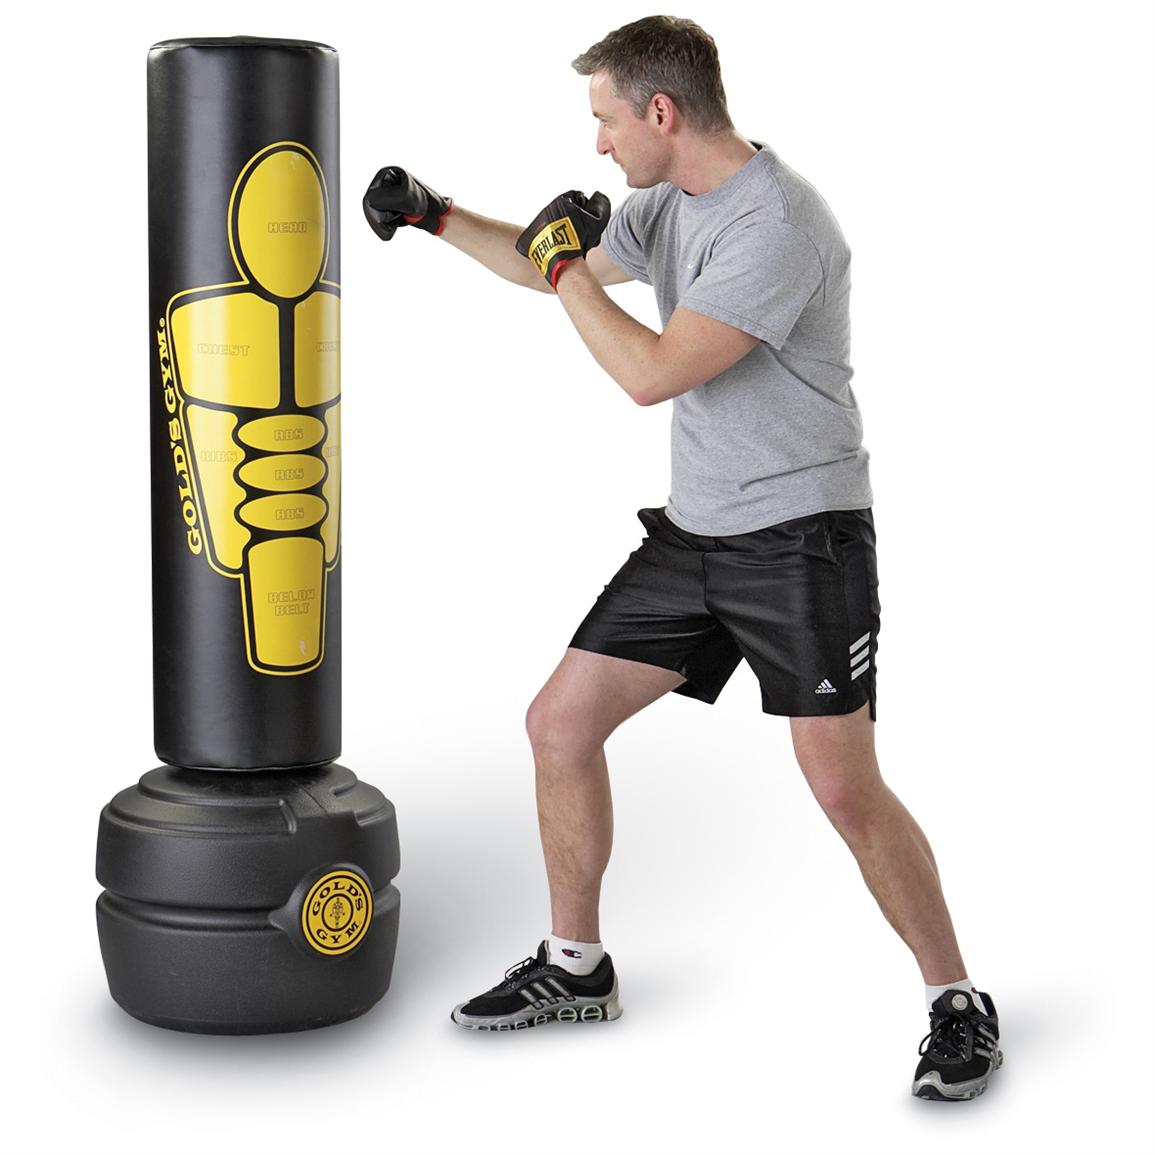 Gold's Gym® ProSeries Personal Trainer 119079, at